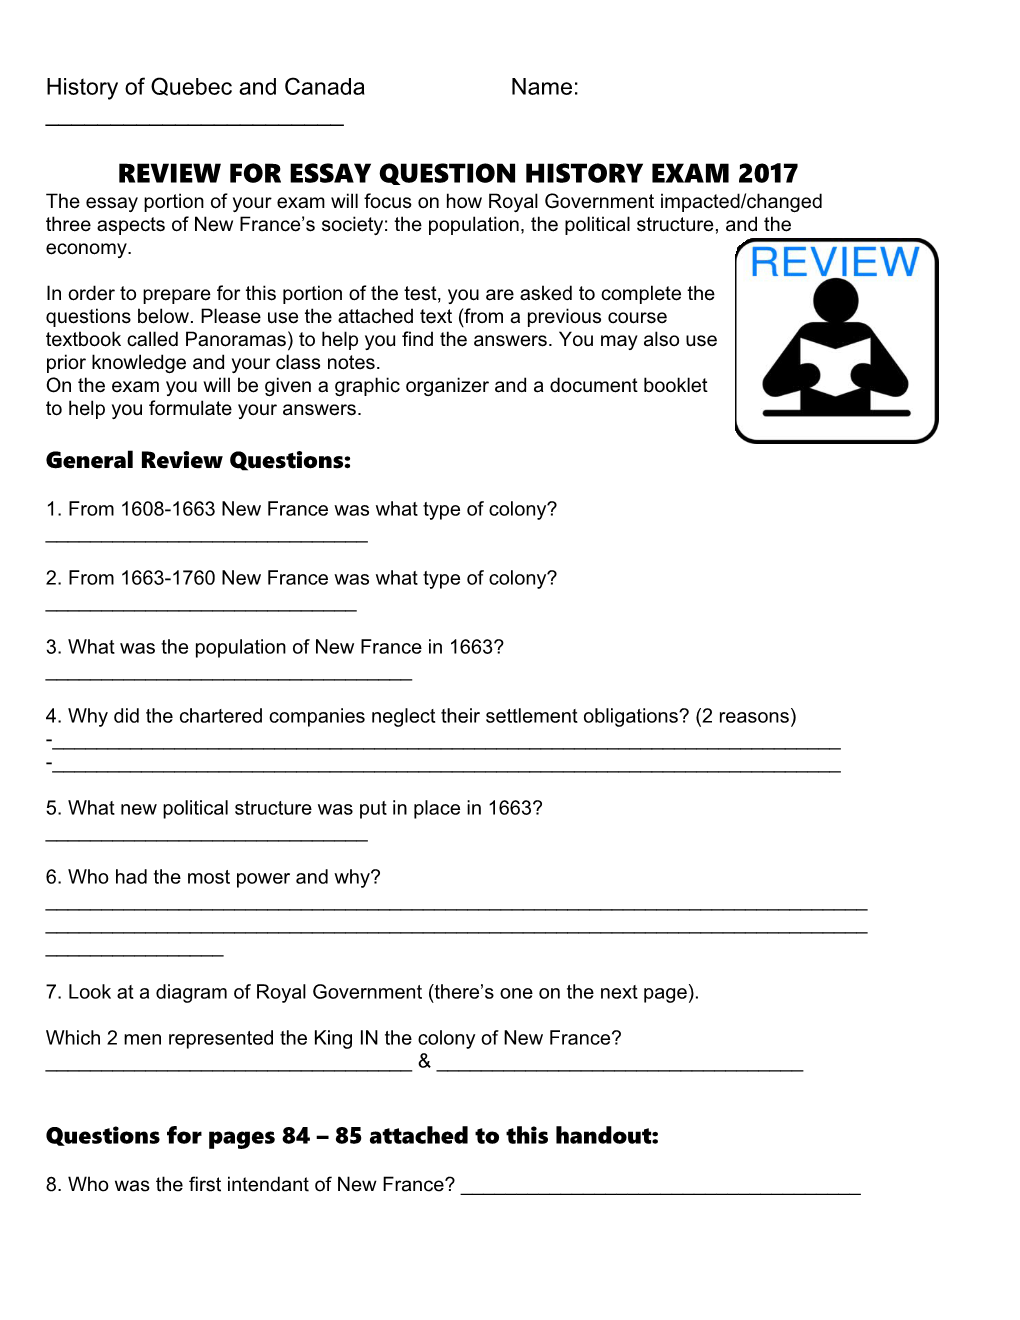 Name: ______ Review for Essay on Royal Government